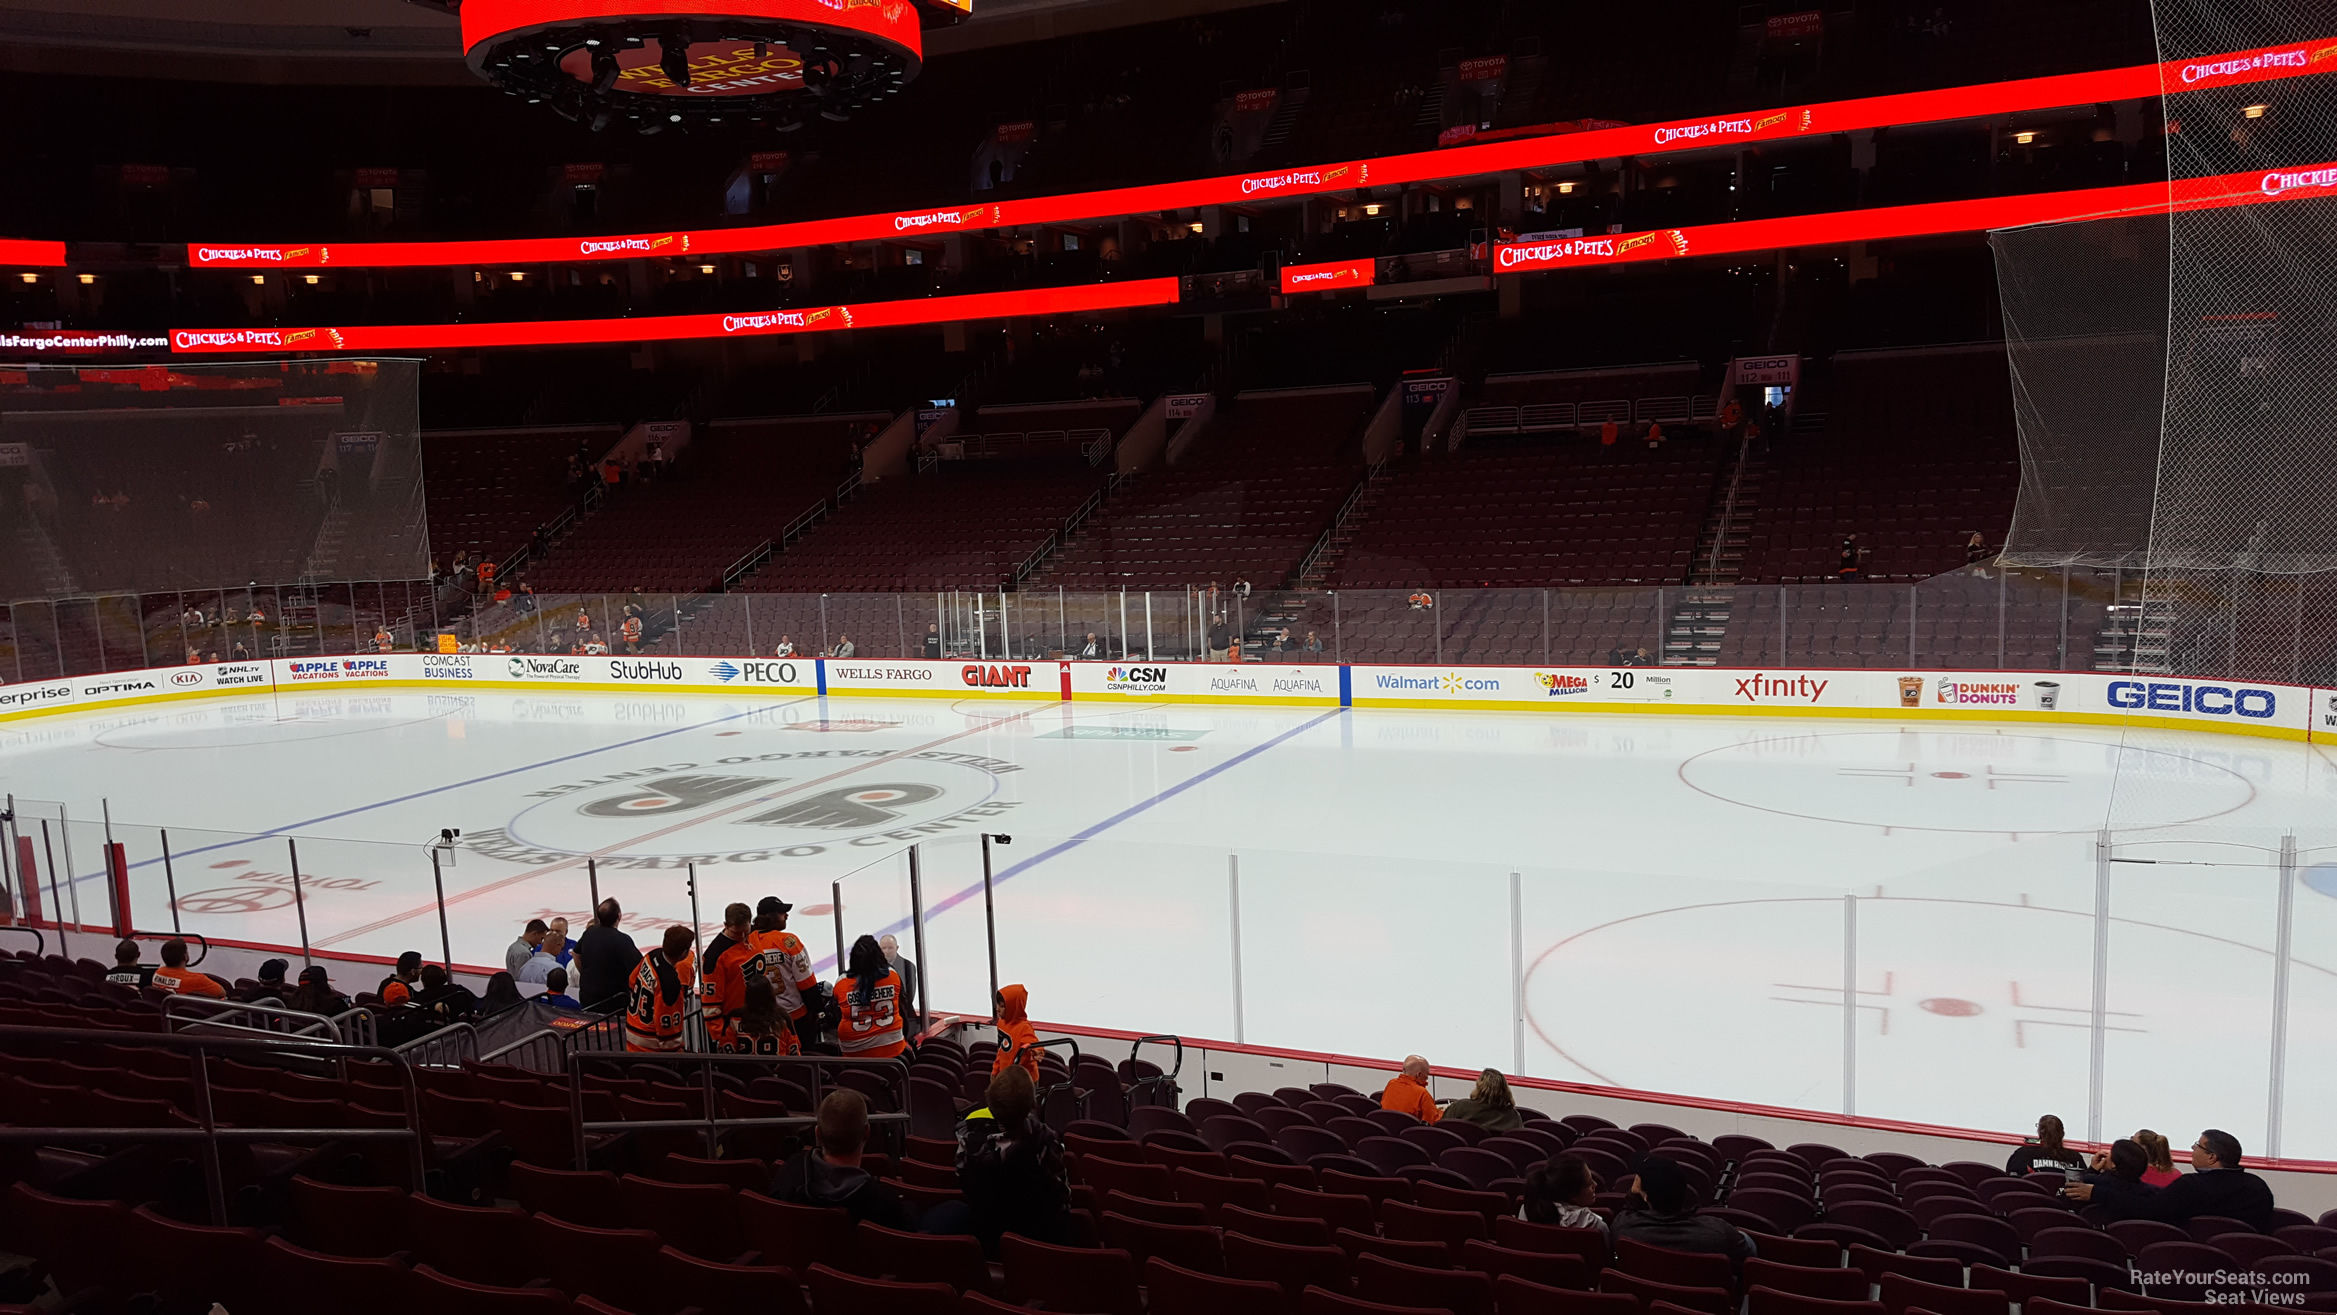 section 103, row 17 seat view  for hockey - wells fargo center